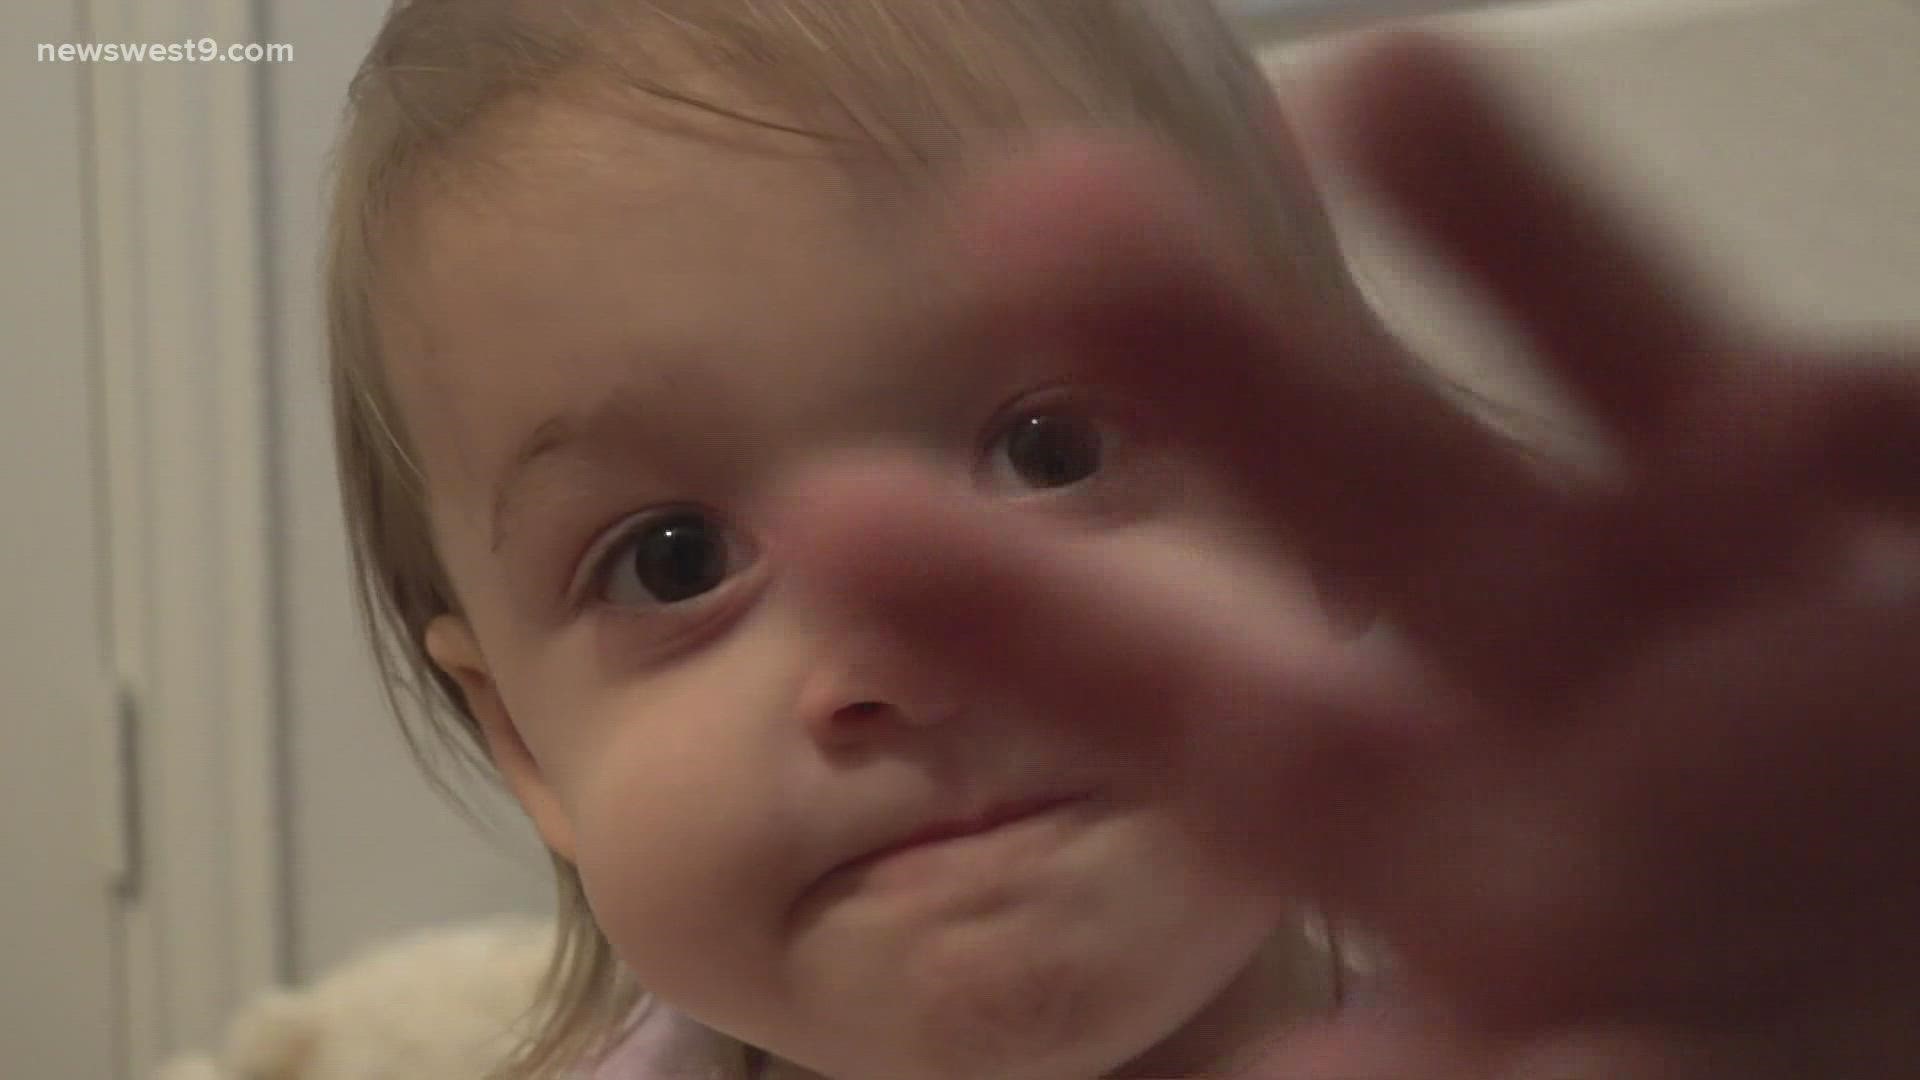 Aislinn was diagnosed with neuroblastoma just a few days before she turned one.